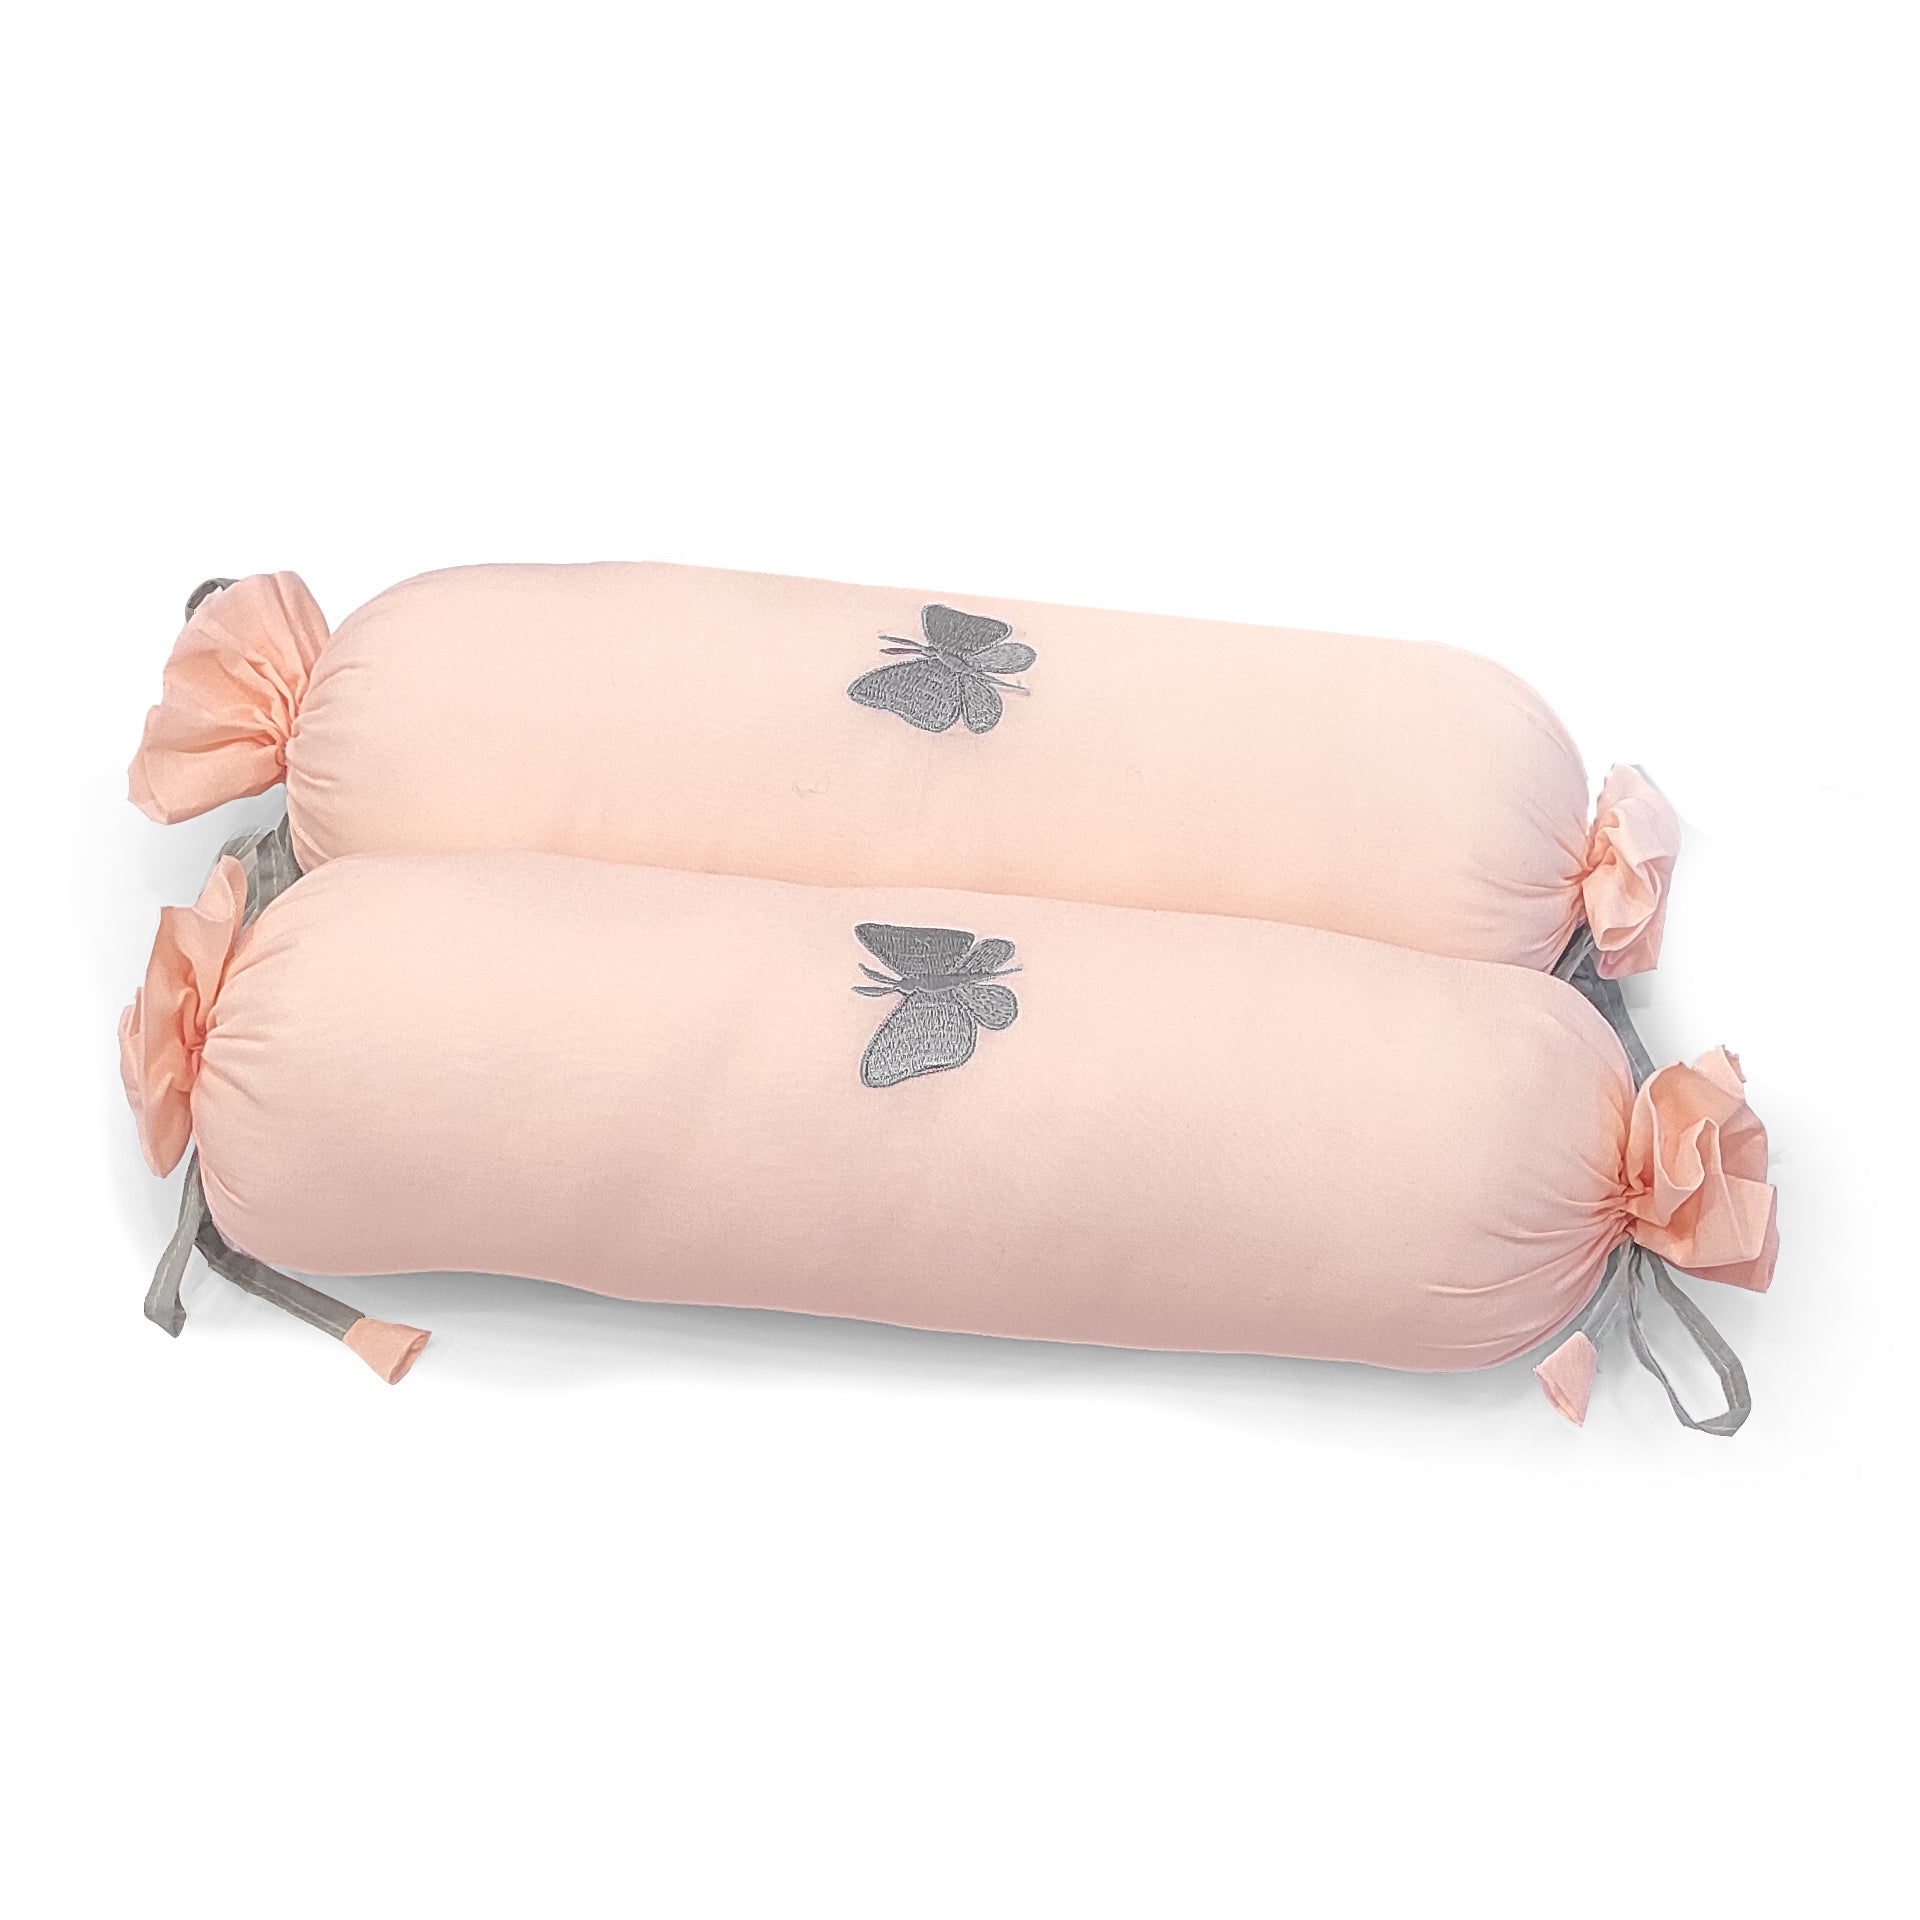 The White Cradle Cot Pillow + 2 Bolsters Set with Fillers - Organic Cotton Fabric, Softest Fiber Filling, Protective Comfort - Butterfly